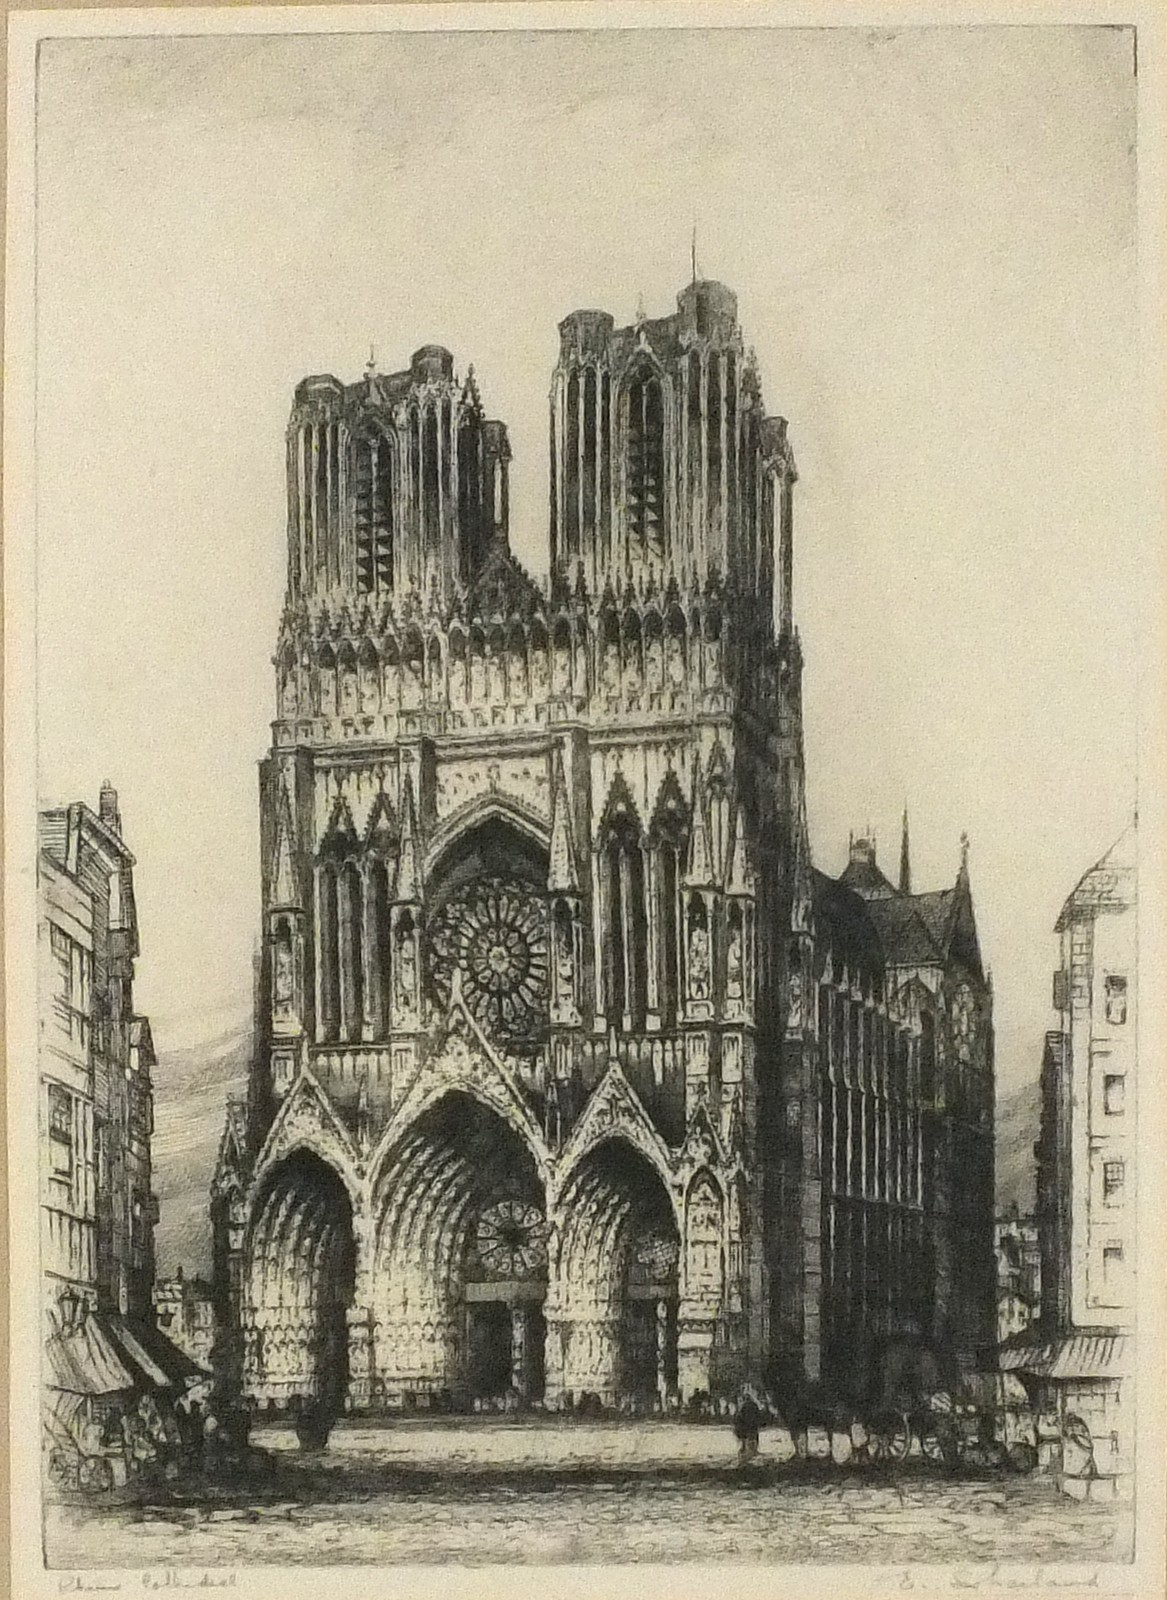 Edward W SHARLAND (British 1884-1967) Reims Cathedral, Steel engraving, Signed in pencil, 15.75" x